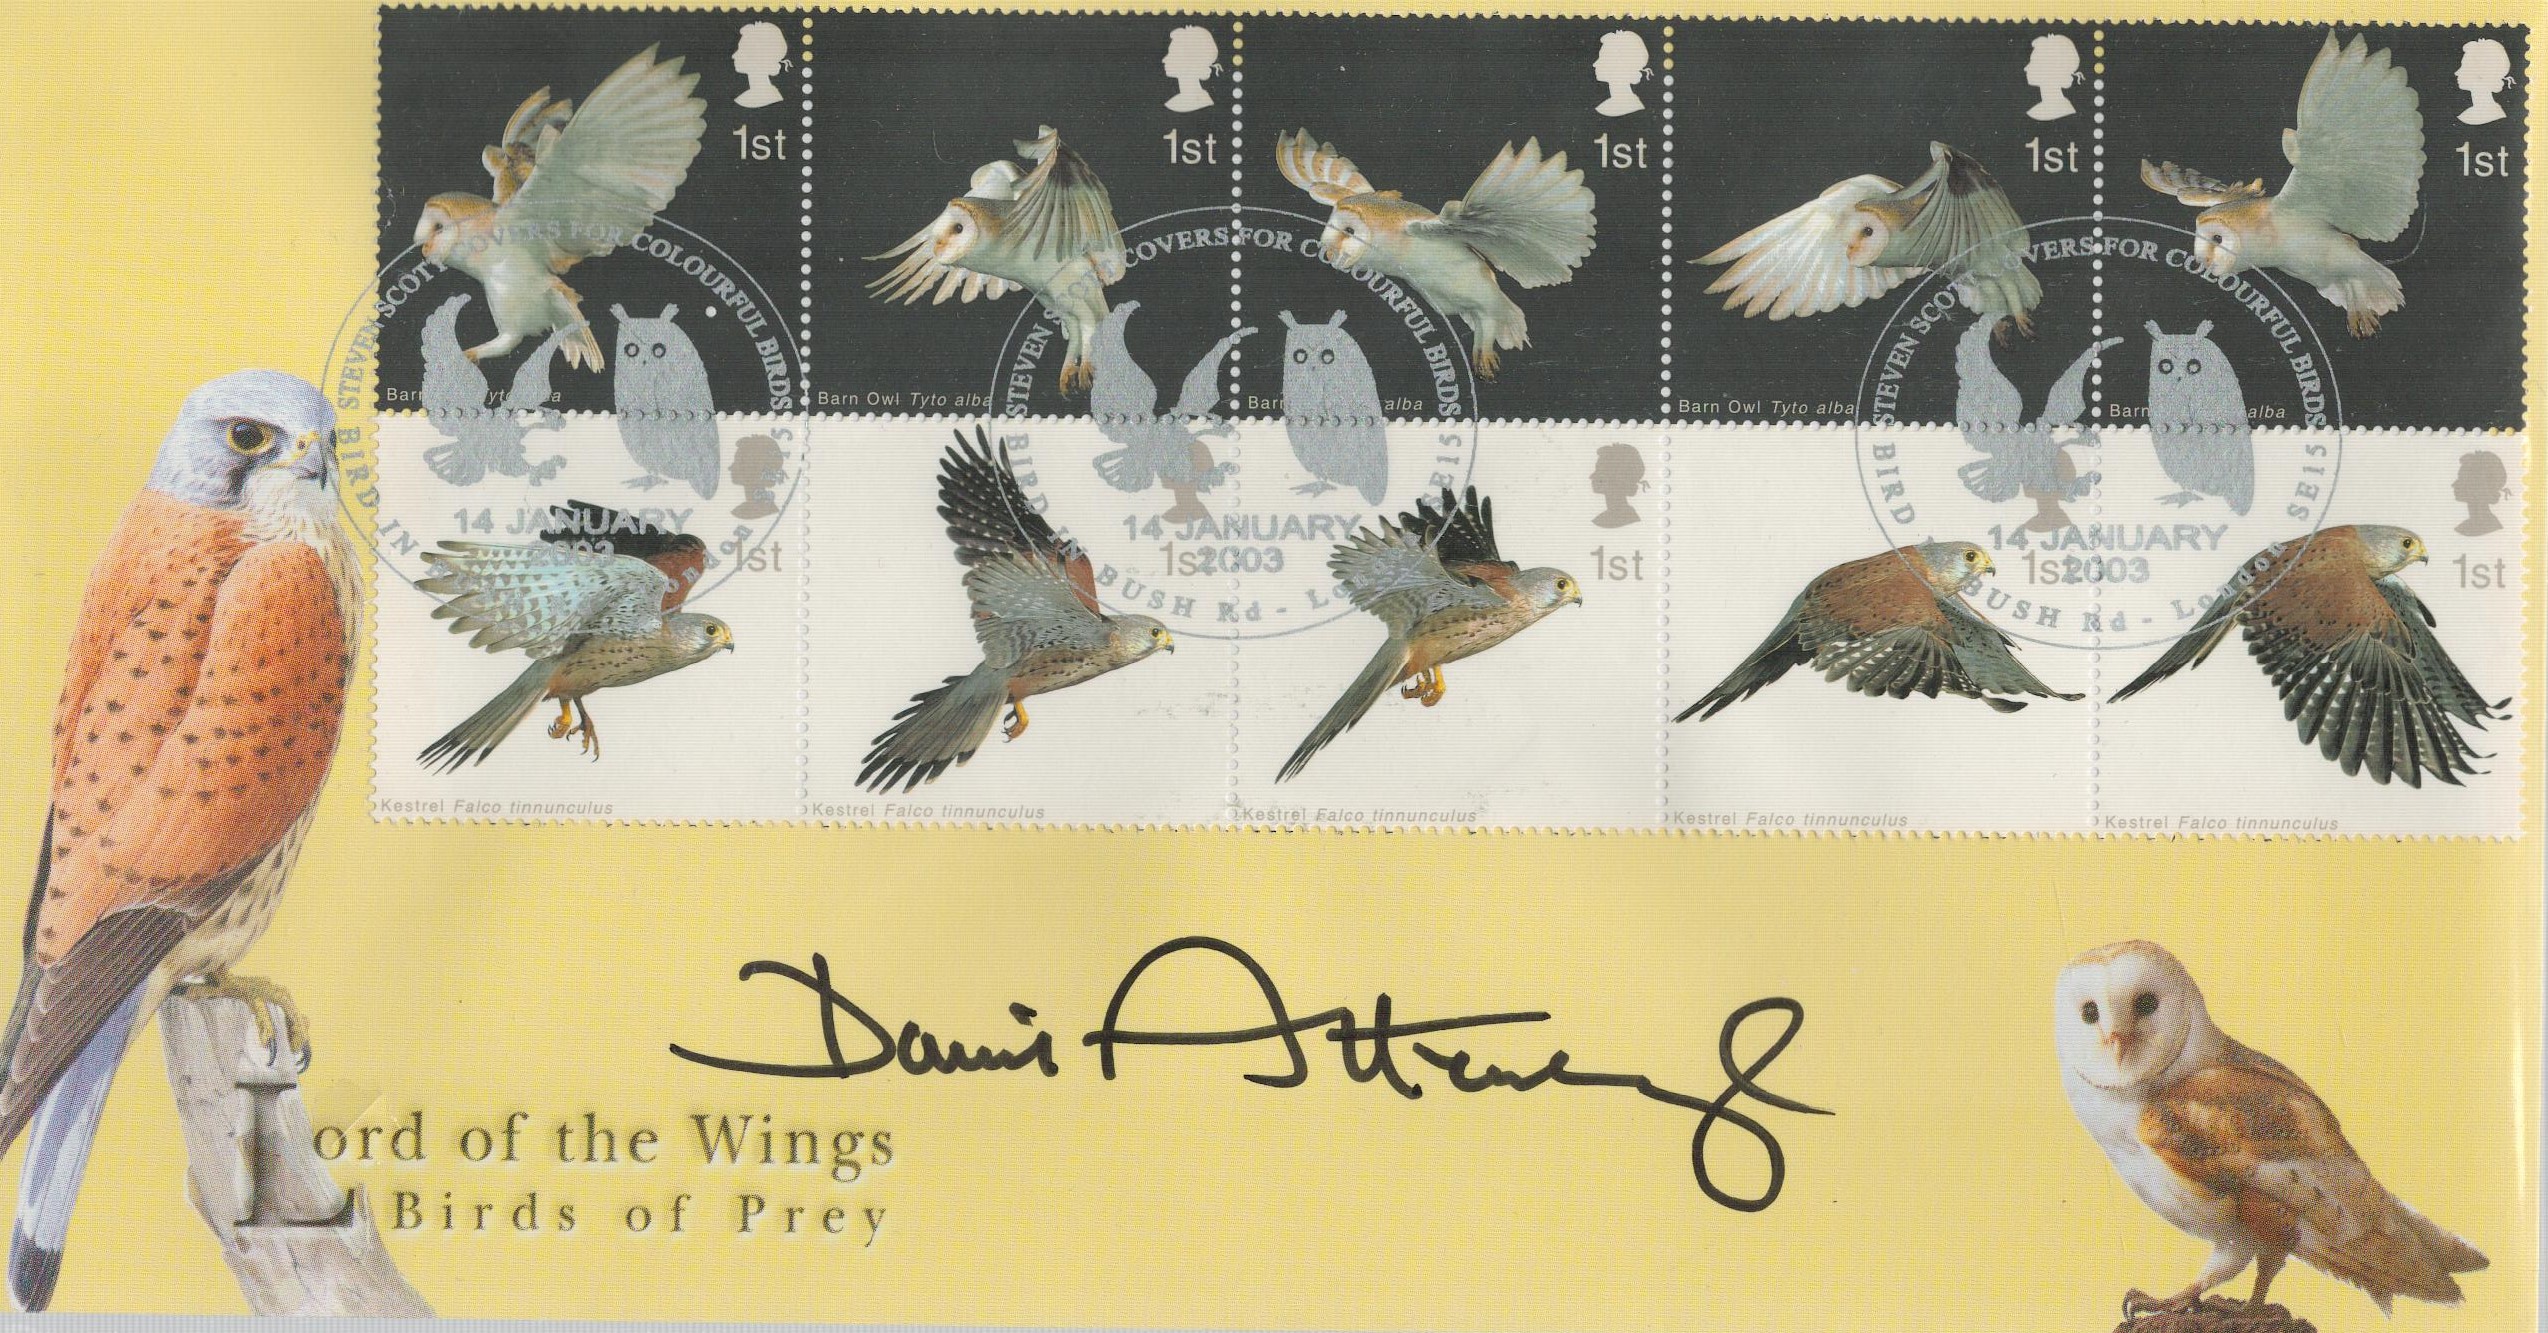 David Attenborough signed 2003 Birds of Prey Lord of the Wings official Scott FDC with special